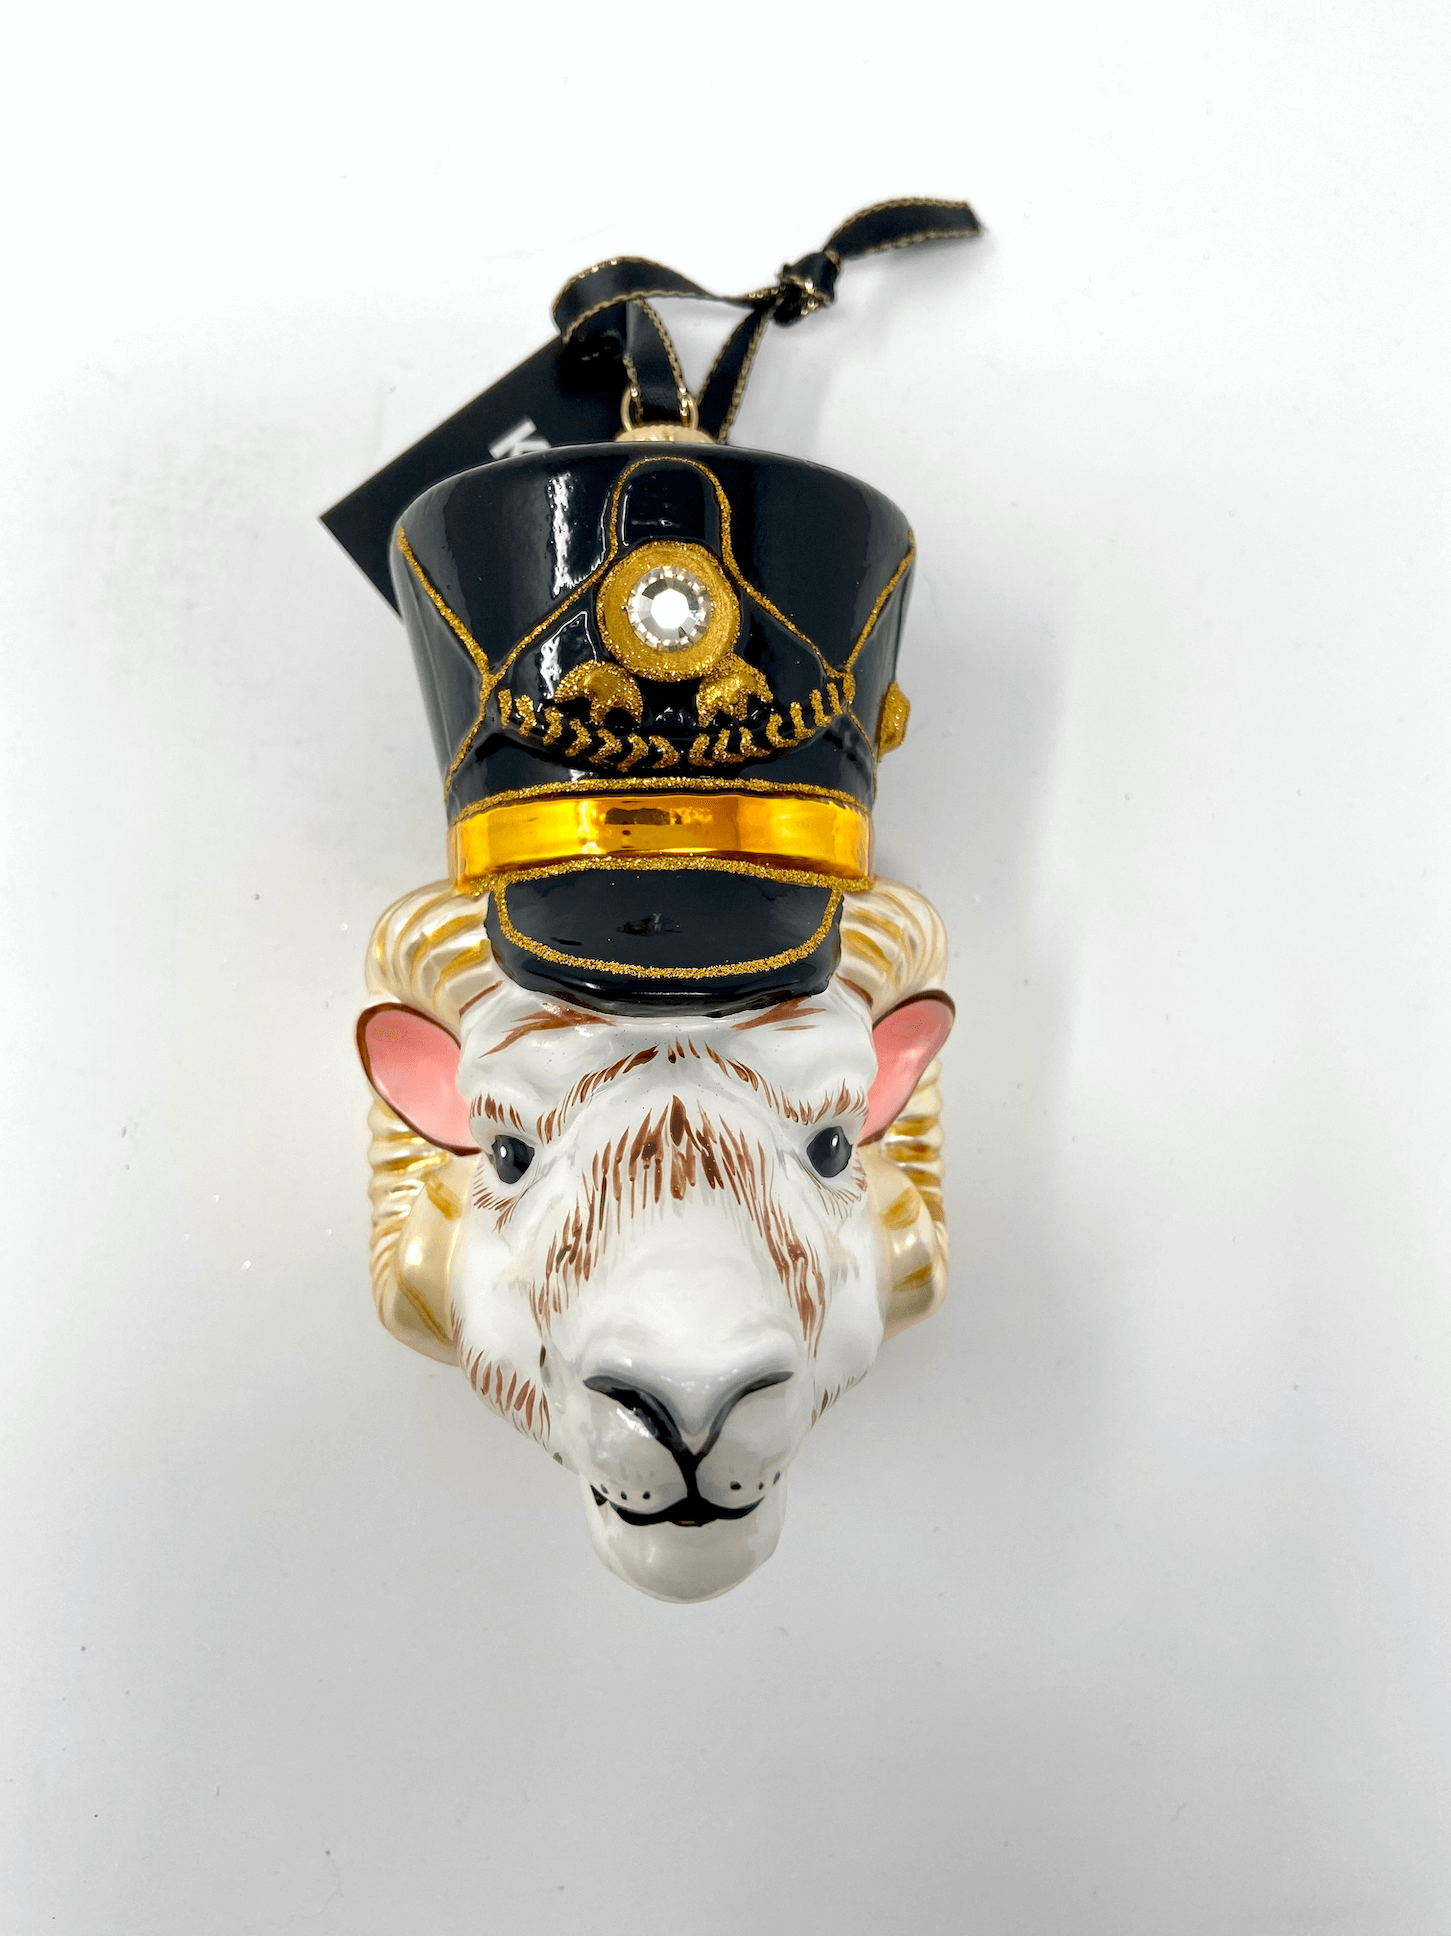 Ram head with nutcracker black cap and gold detailing. Polish glass christmas ornaments in saturated colors.